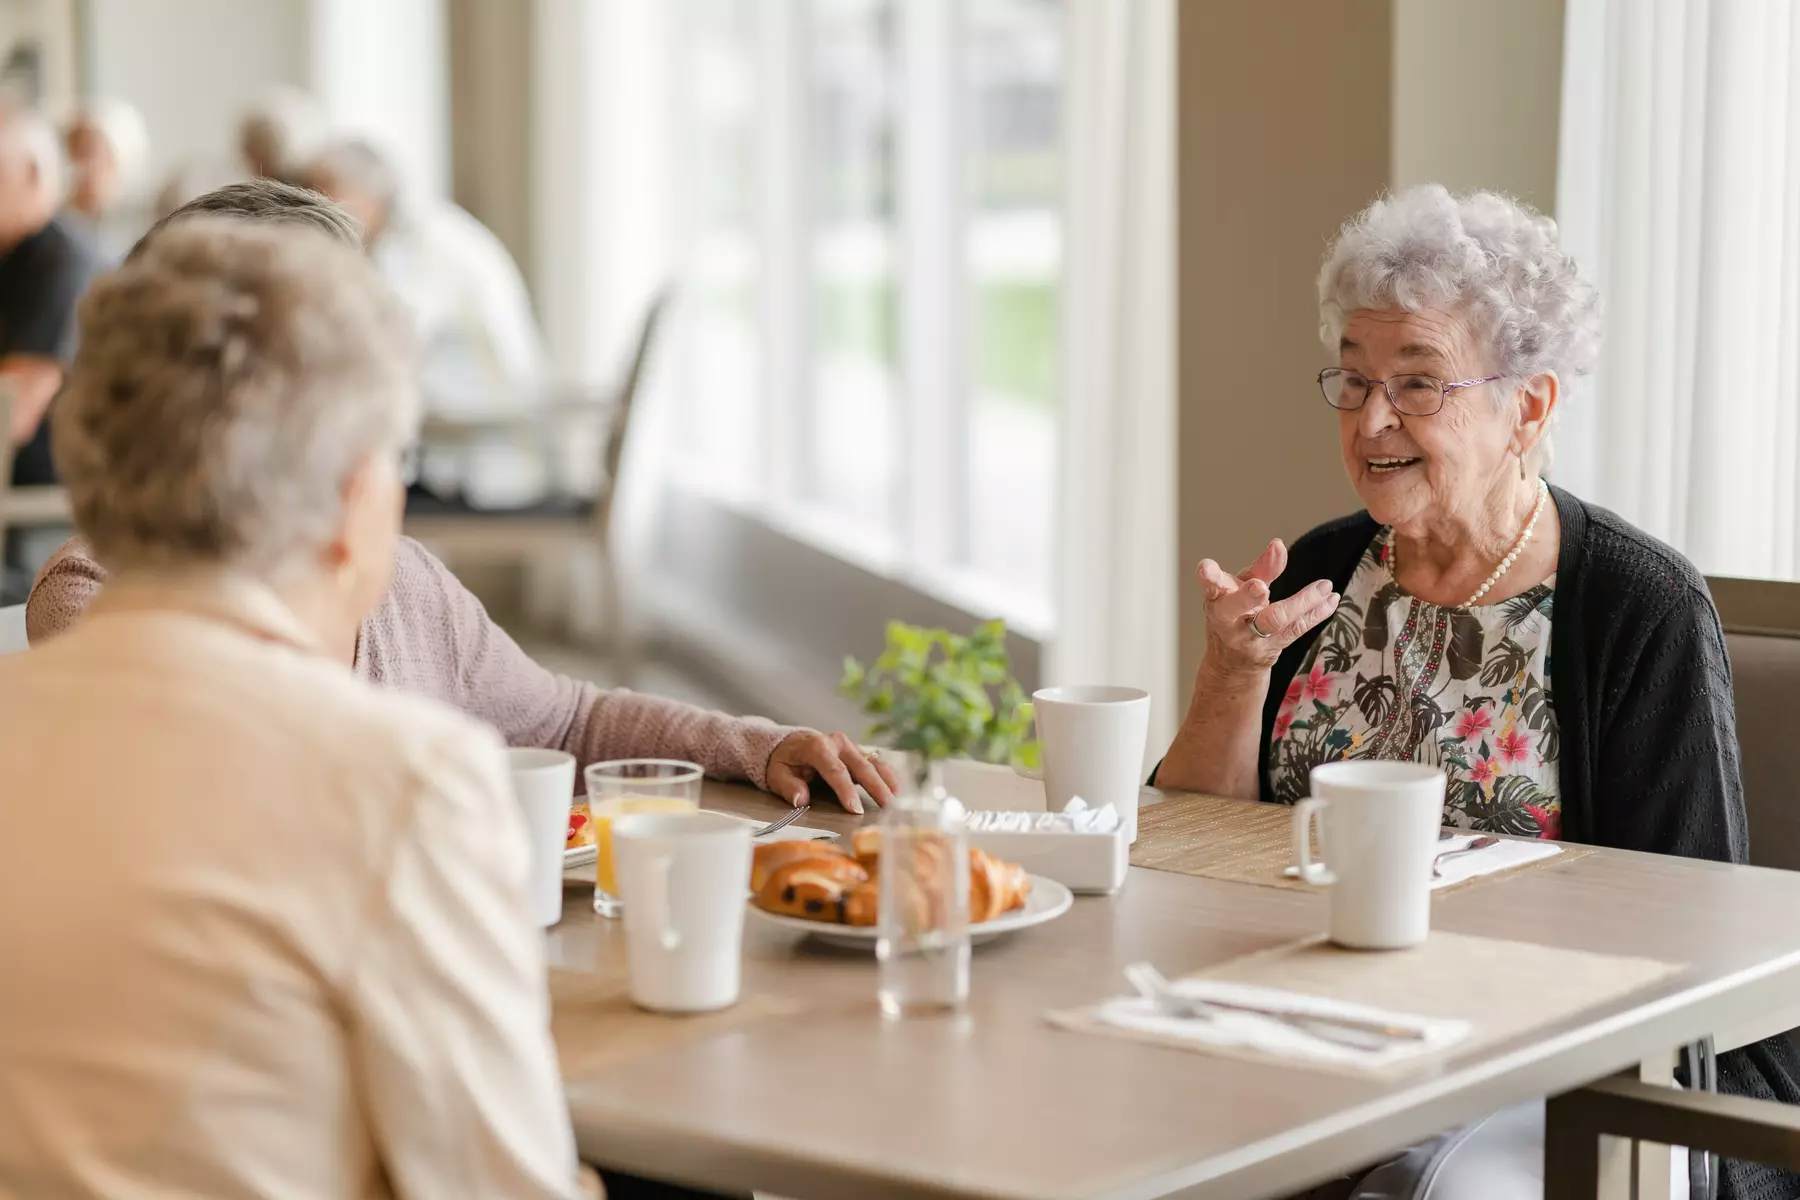 Senior residents having a pleasant conversation at the dinning table while enjoying a cup of coffee